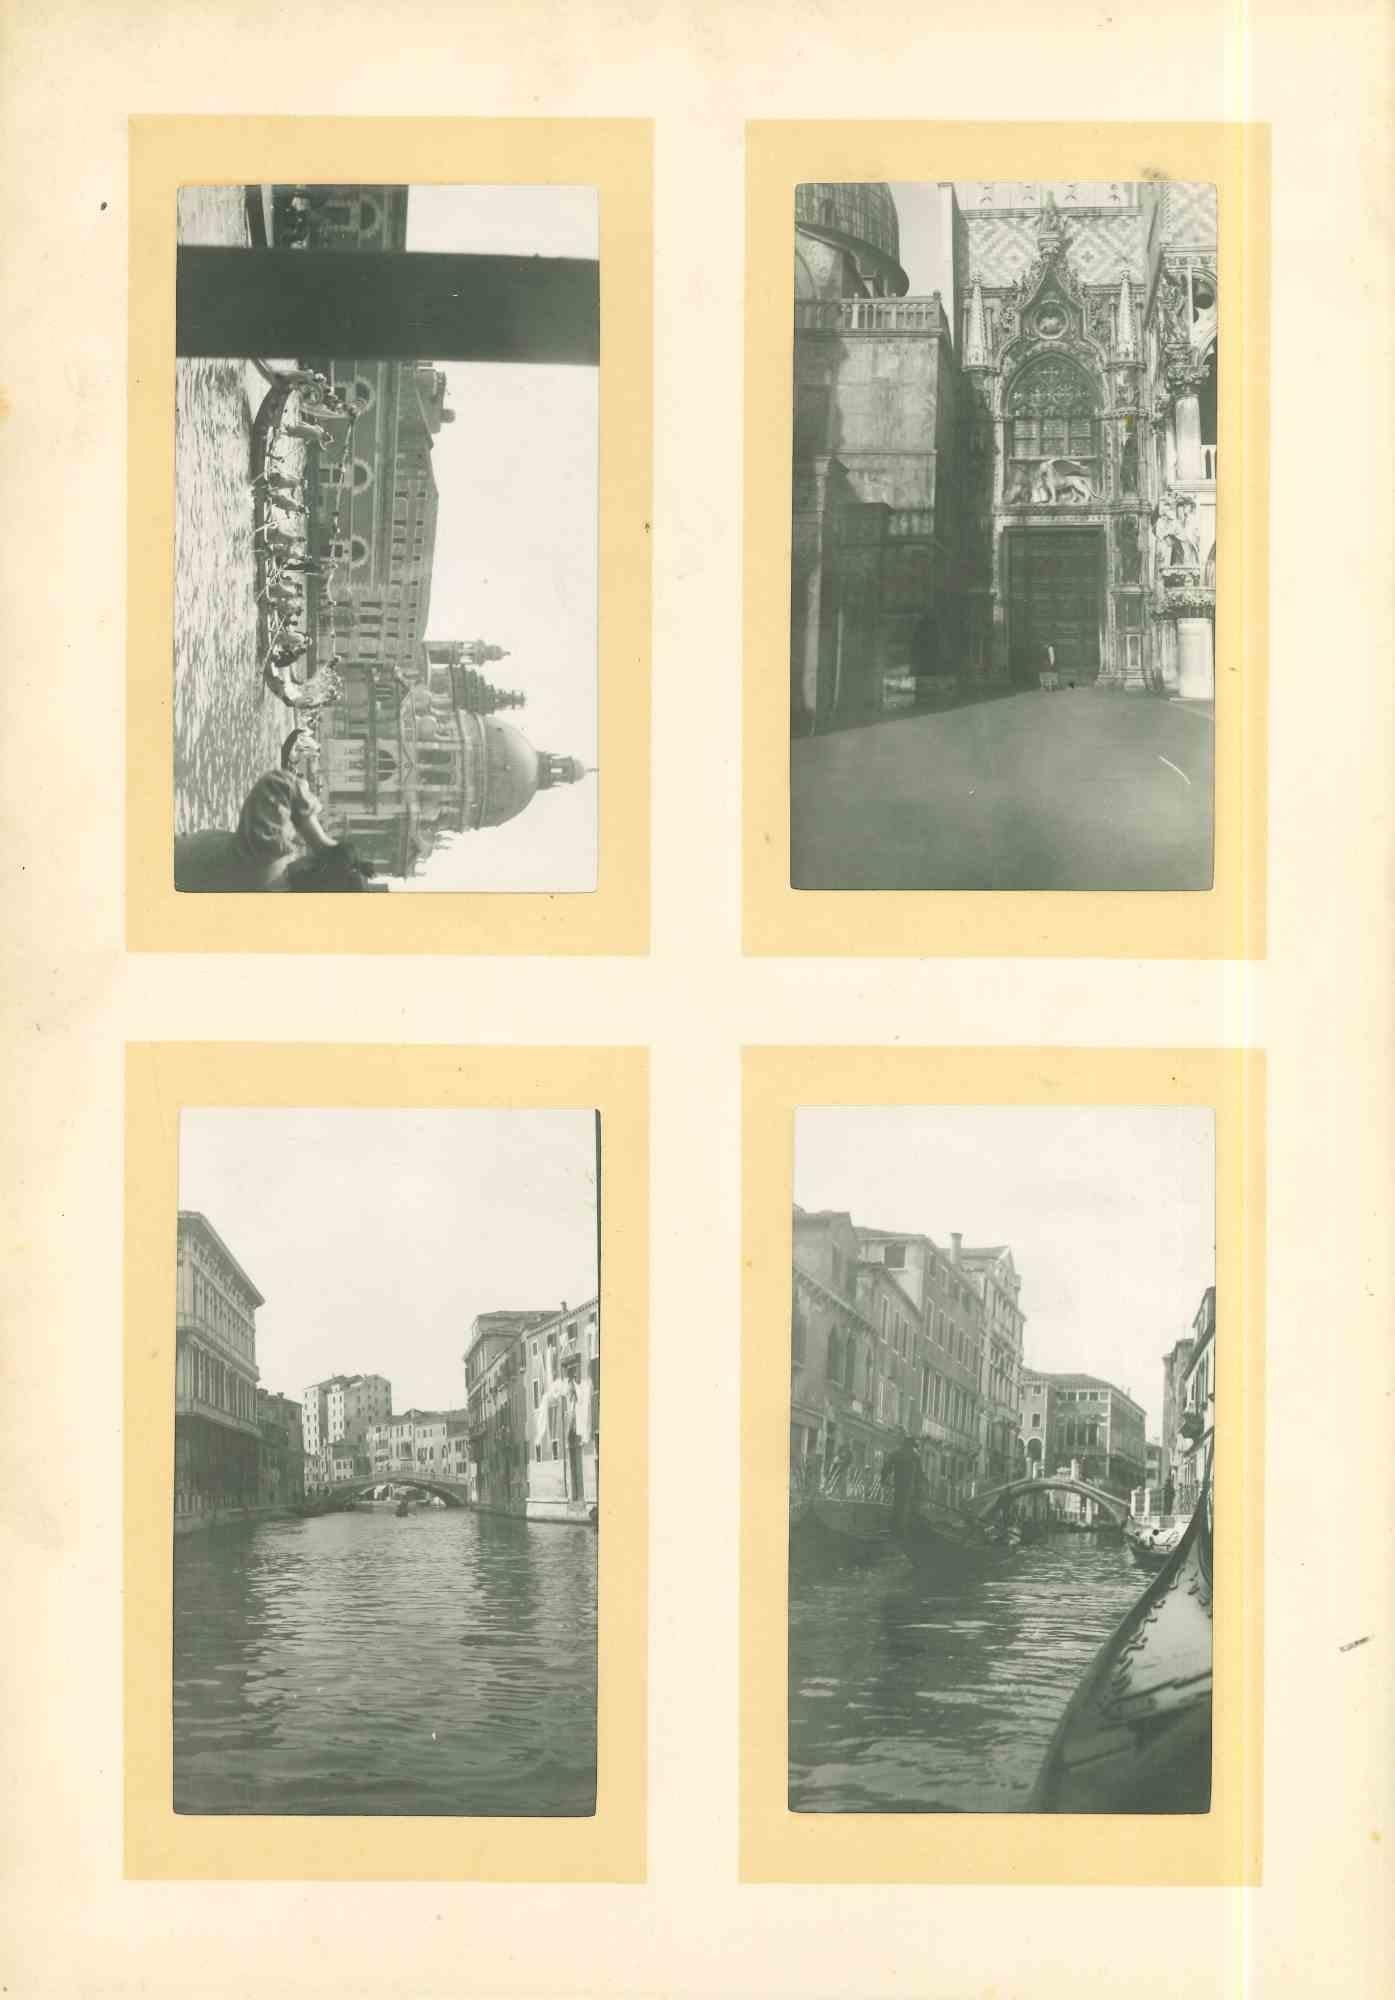 Unknown Figurative Photograph - Views of Venice - Vintage Photograph - Early 20th Century